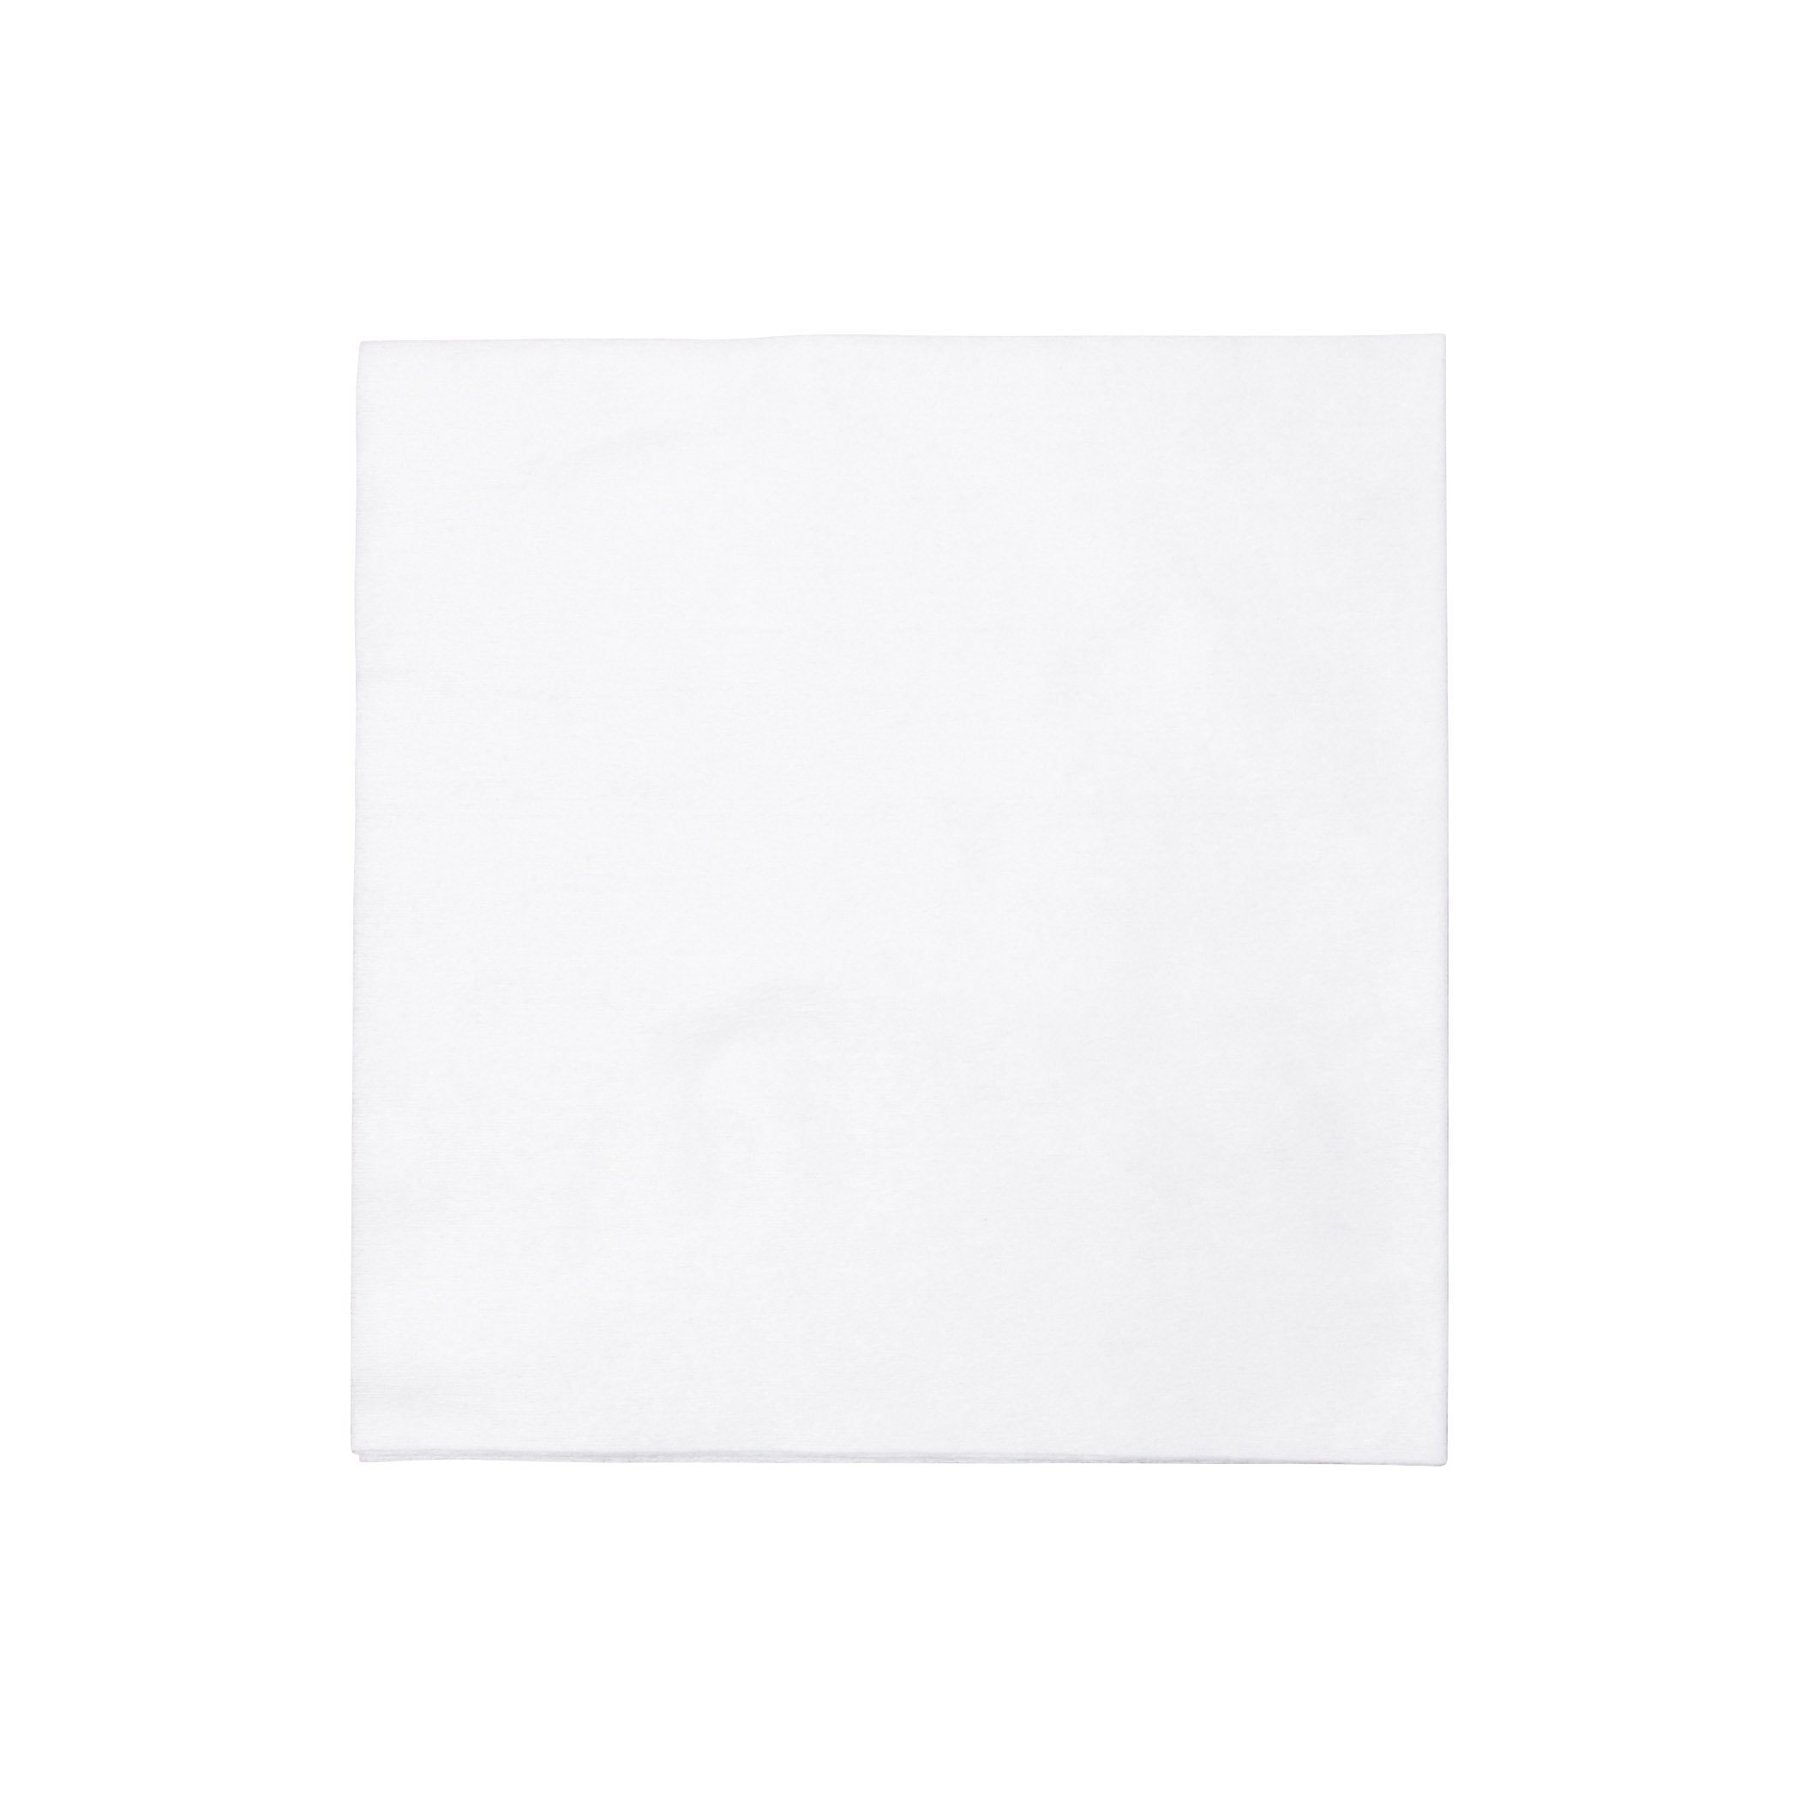 Papersoft Napkins Bianco Solid Dinner Napkins (Pack of 50) Home Decor Vietri   